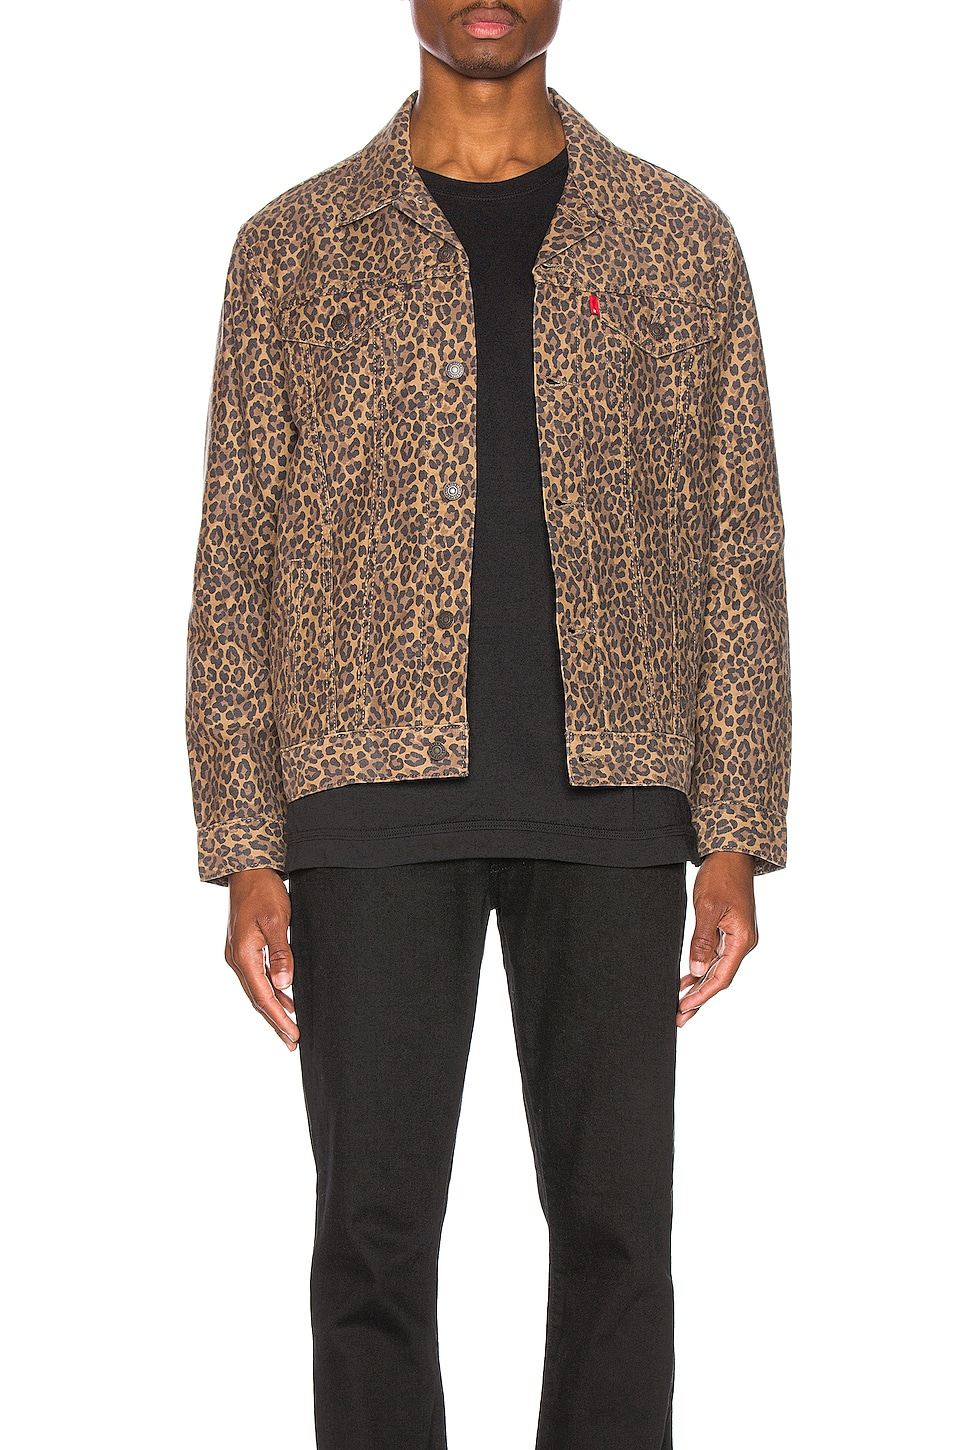 LEVI'S Premium The Trucker Jacket in Patchy Cheetah | REVOLVE